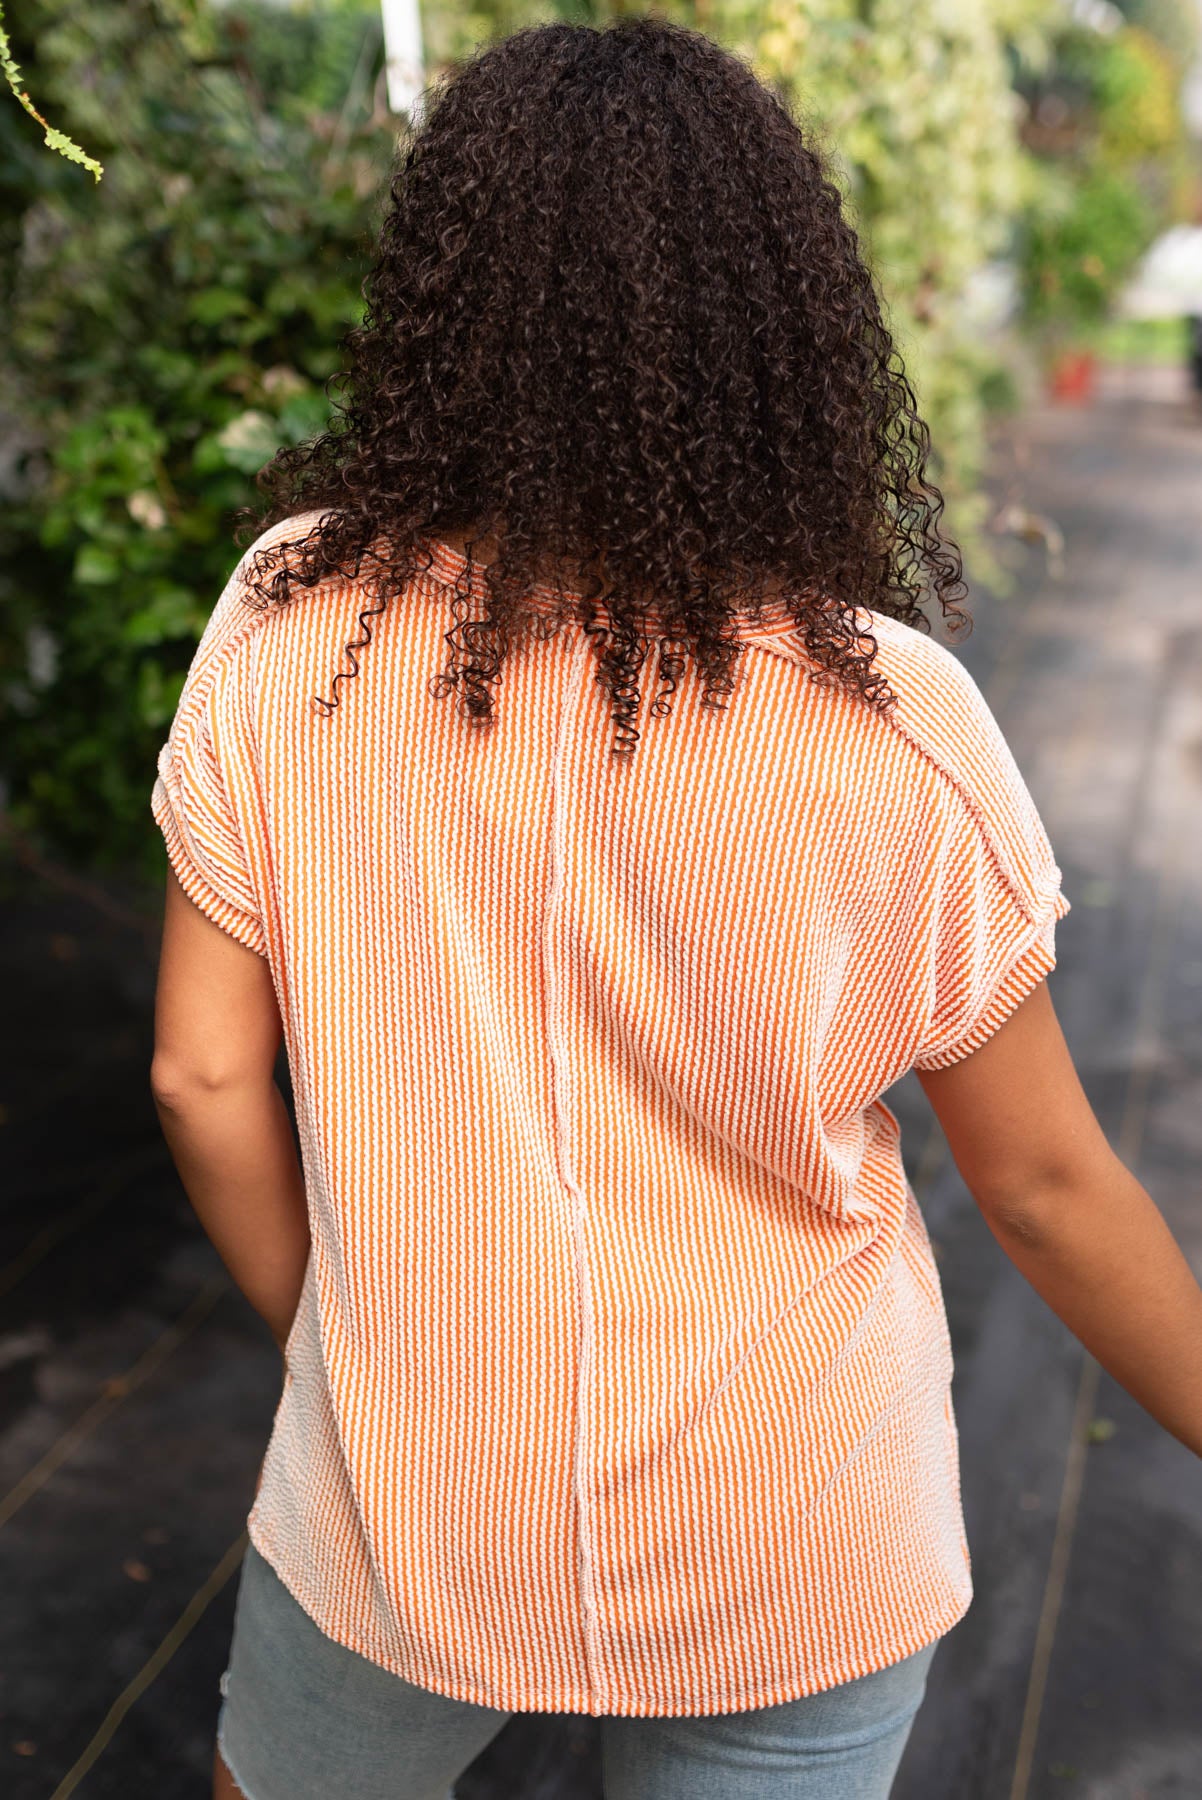 Back view of the sunkist ribbed top